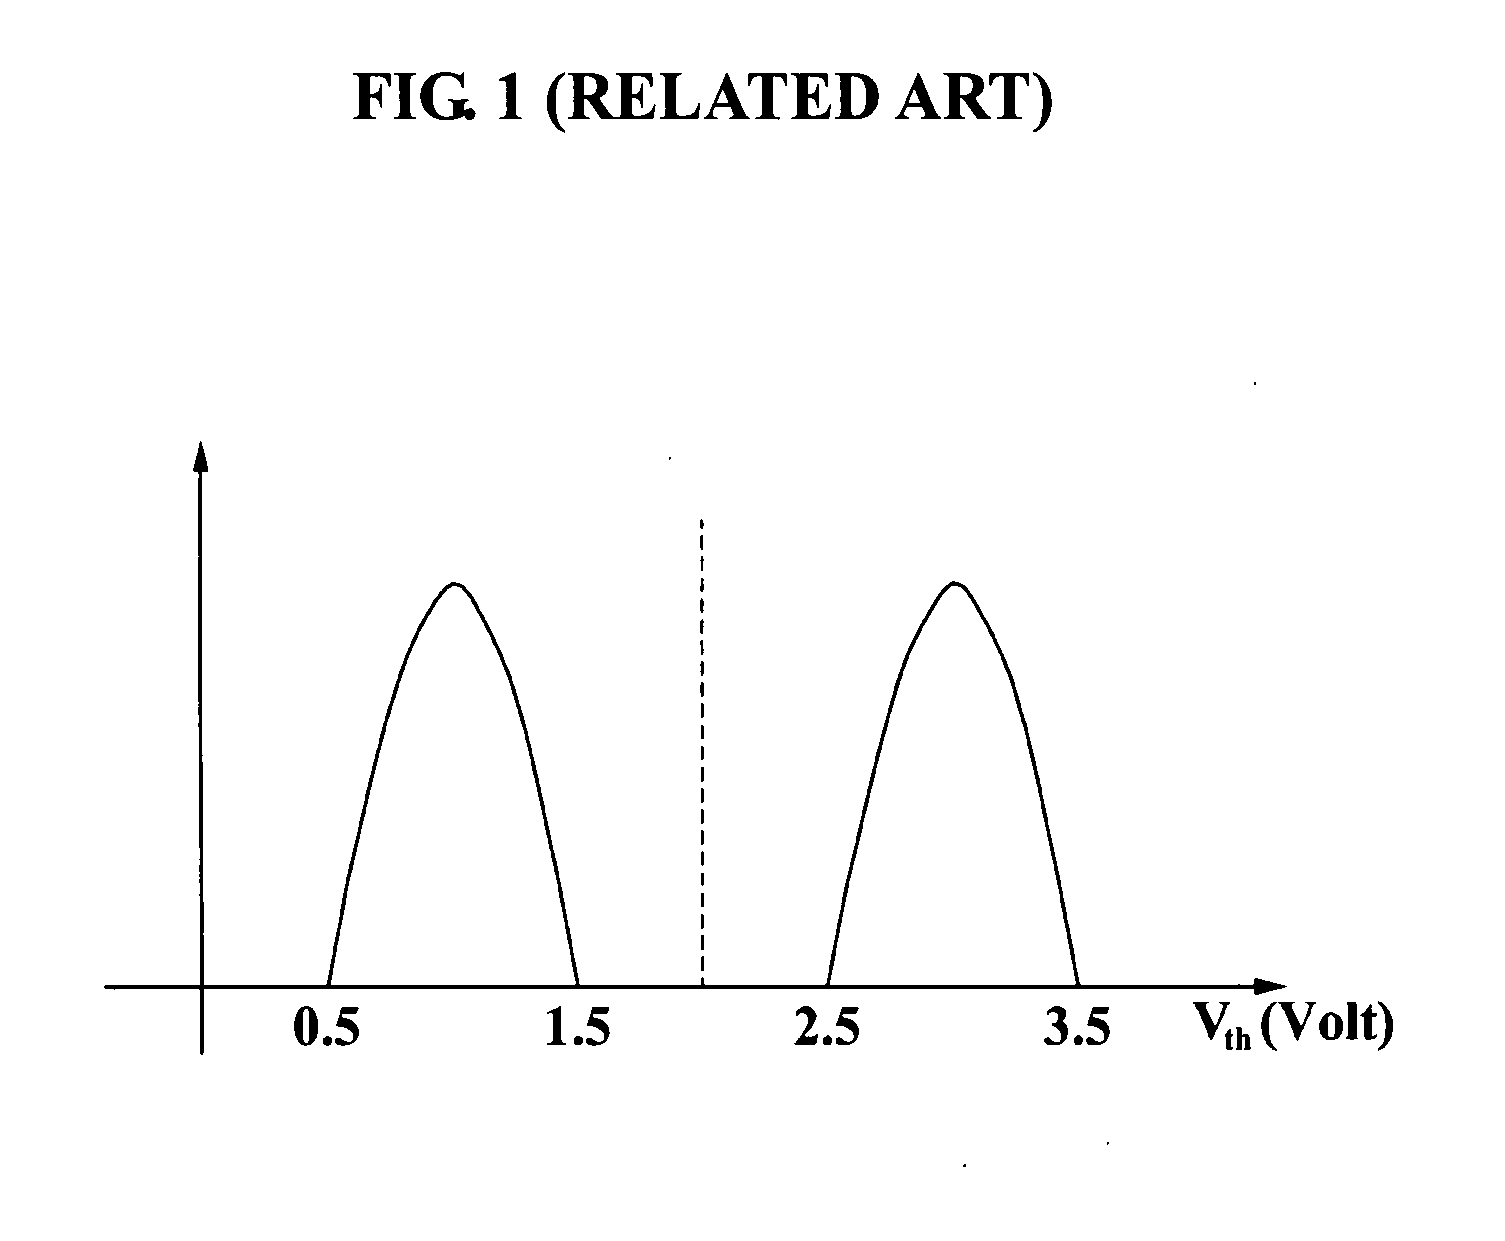 Multi-level cell memory devices using trellis coded modulation and methods of storing data in and reading data from the memory devices